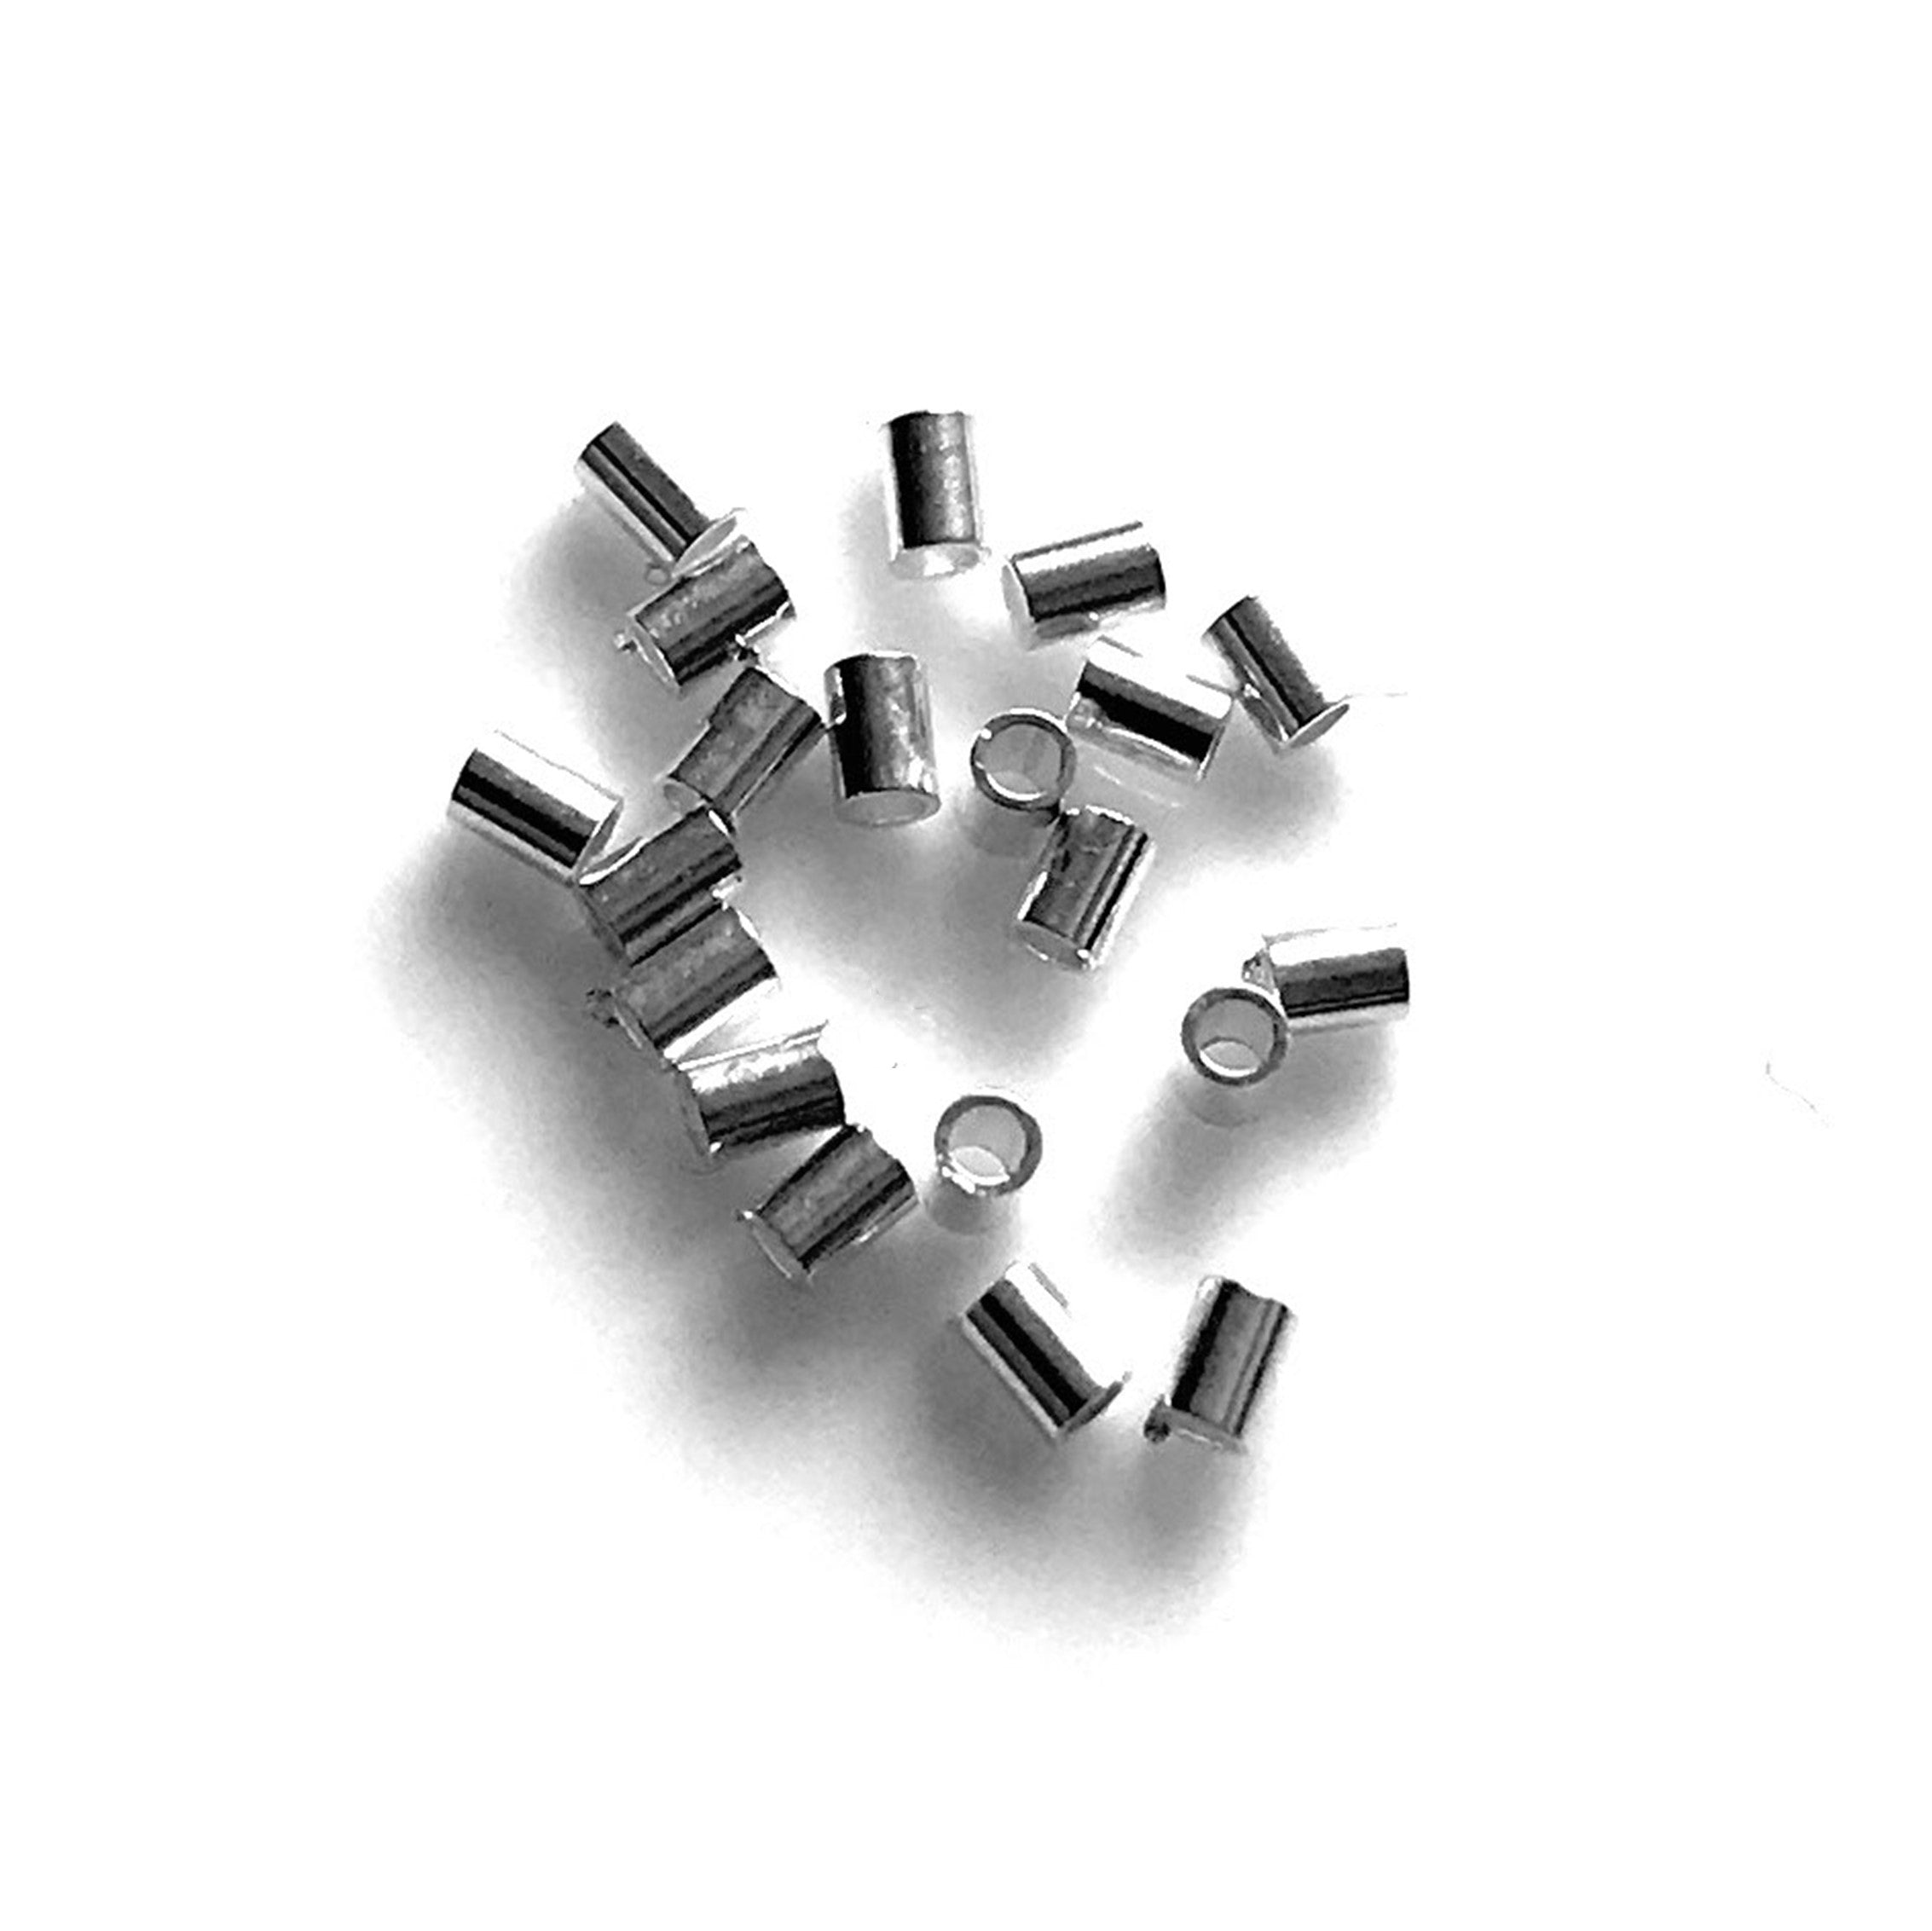 20-Pack 1.1mm x 2mm x 0.8mm Sterling Silver Crimp Tubes for Jewelry Projects